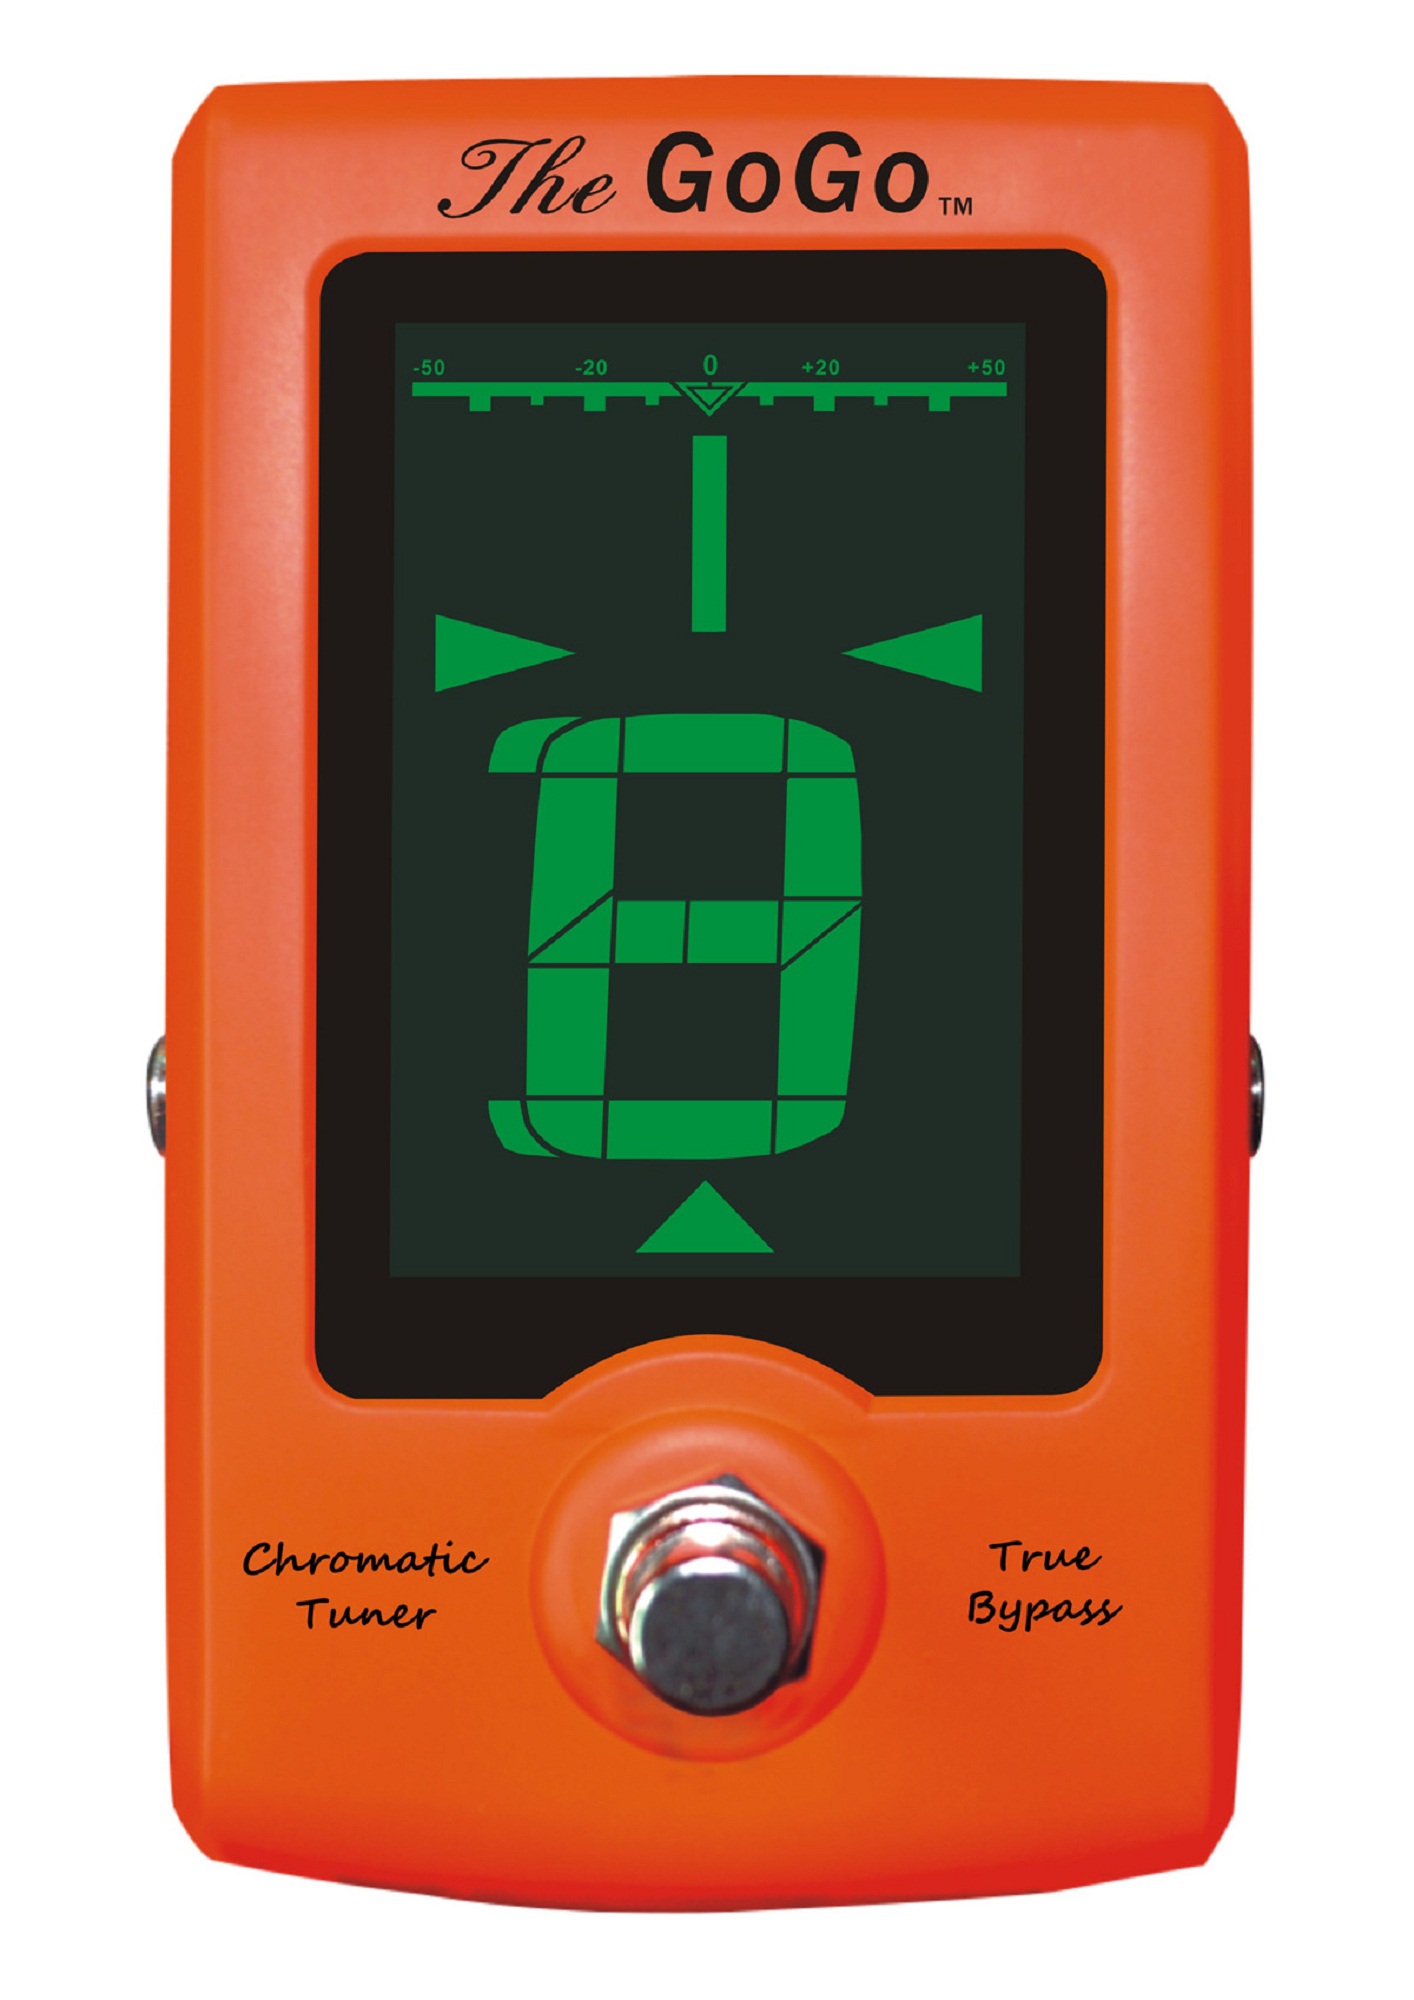 The GoGo Tuners The GoGo Chromatic Pedal Tuner